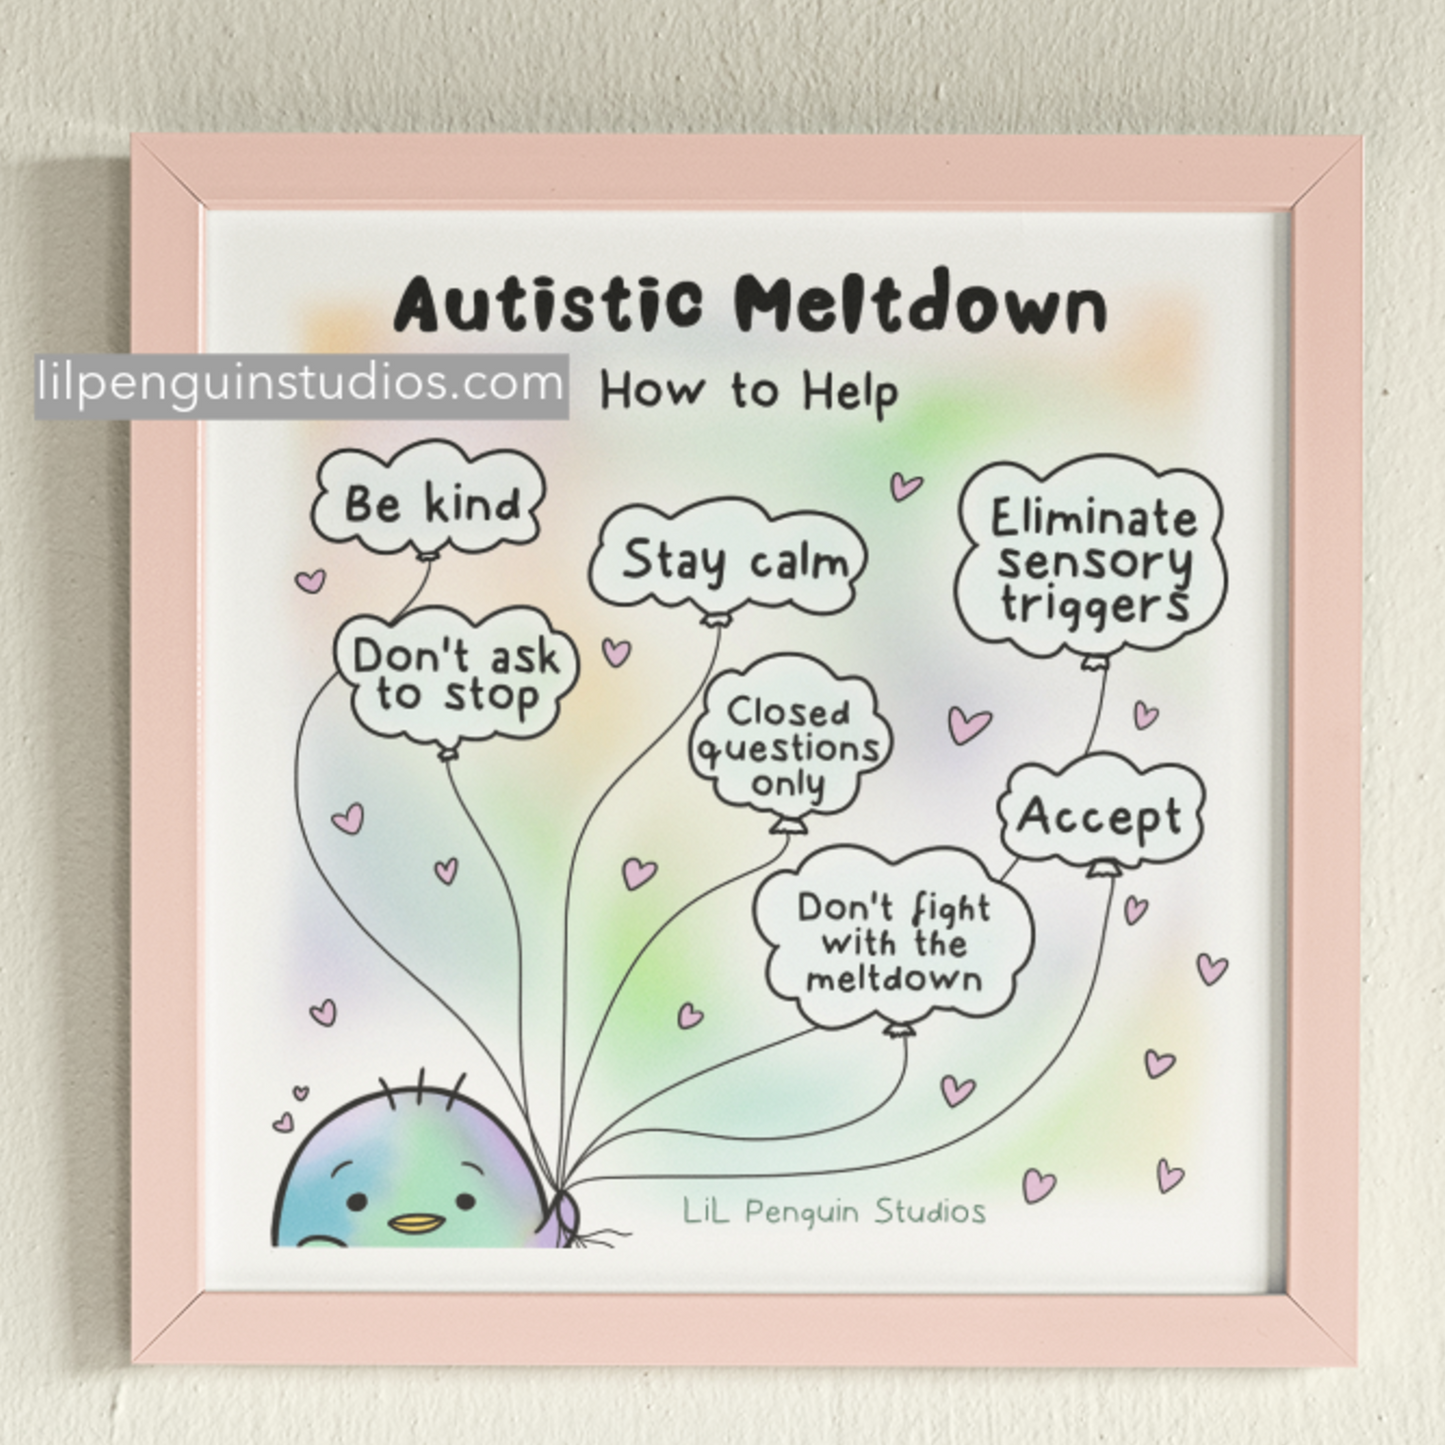 Autistic Meltdown, How to Help printable poster.